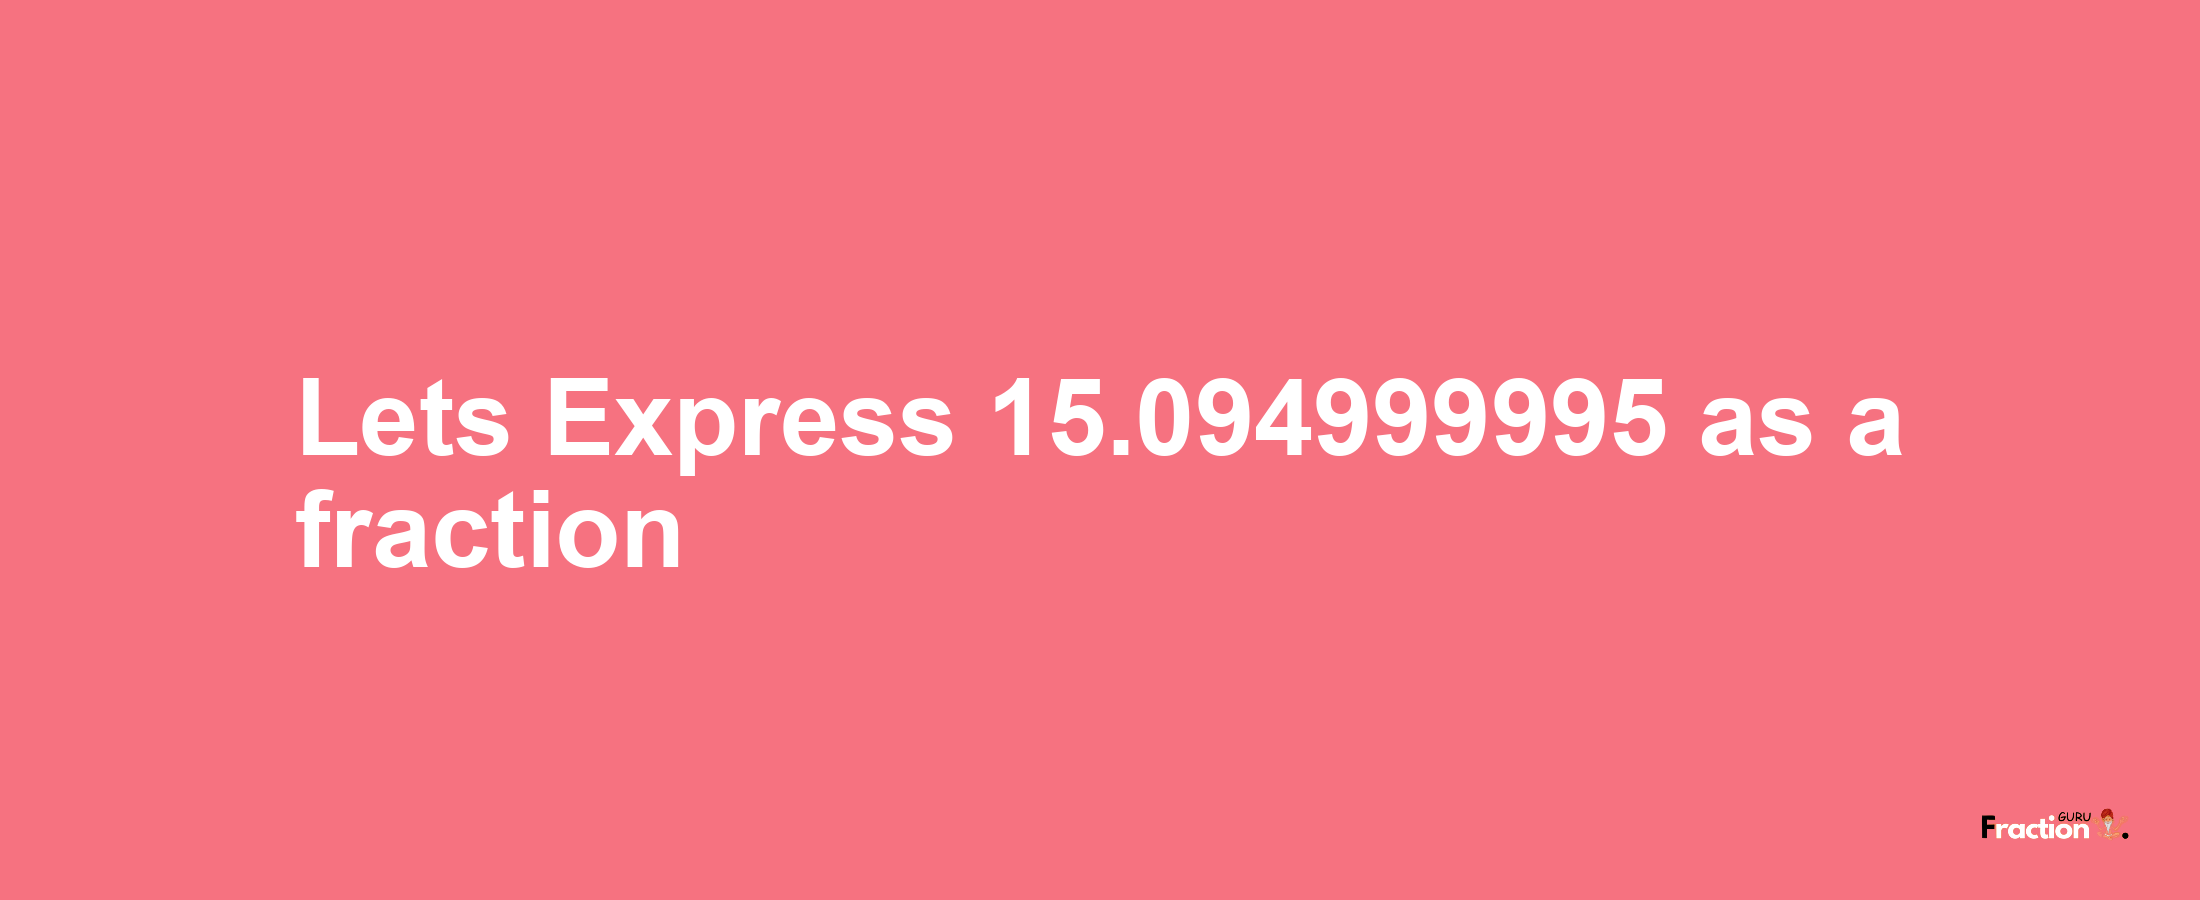 Lets Express 15.094999995 as afraction